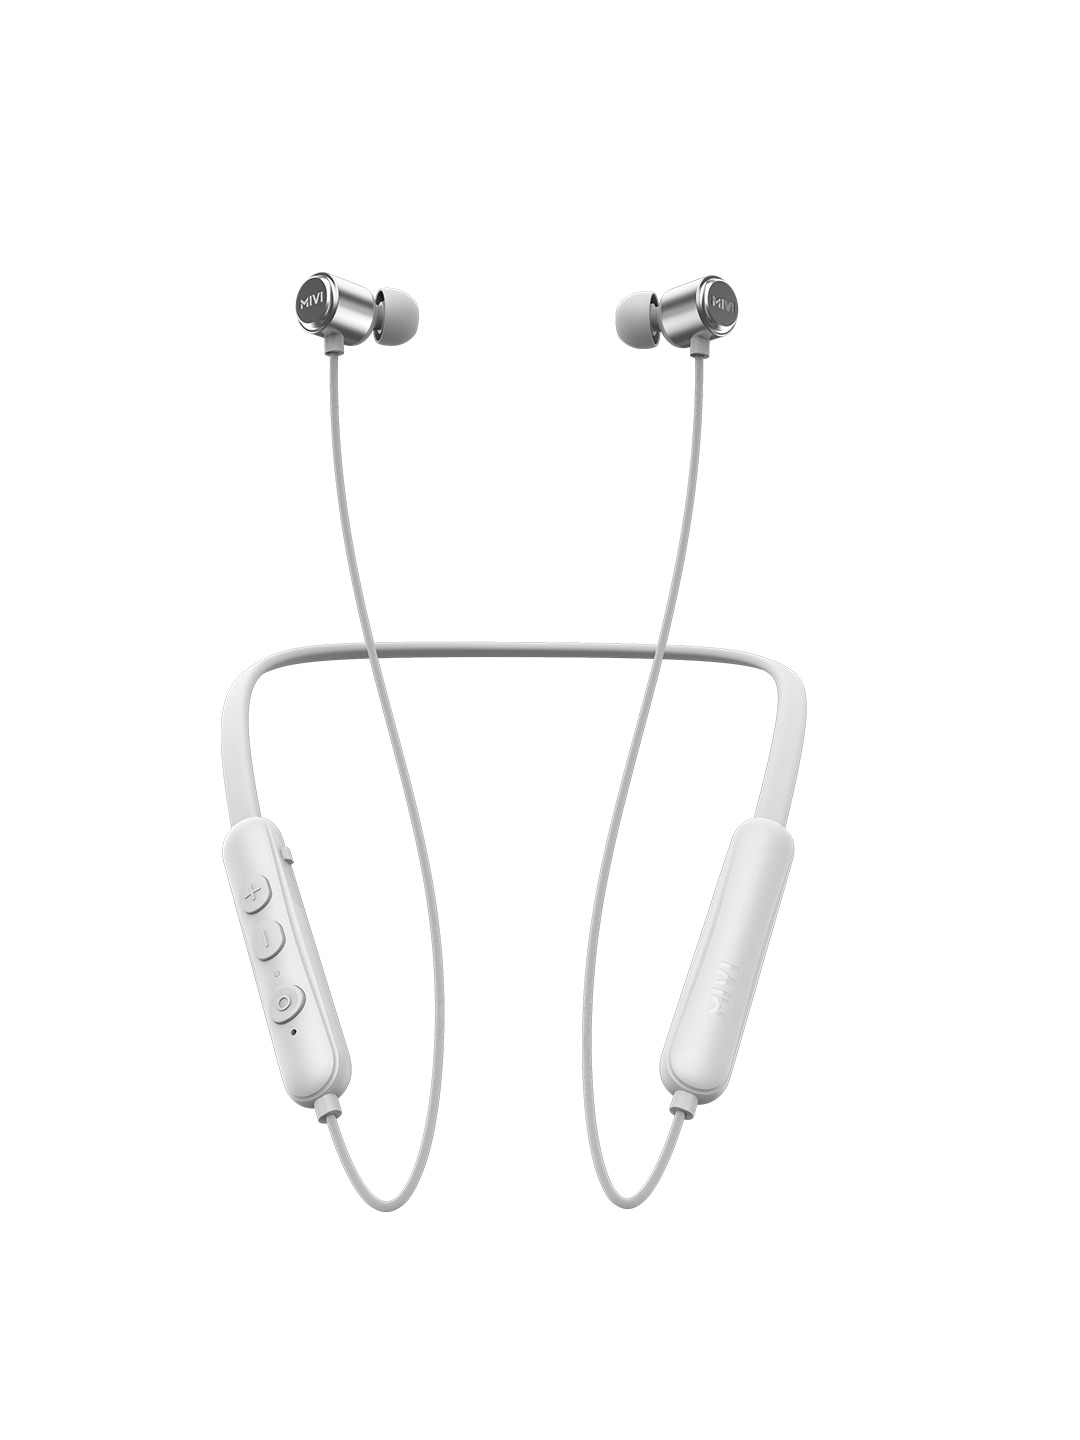 mivi Collar Flash Wireless Earphones with Mic & Fast Charging - Grey Price in India